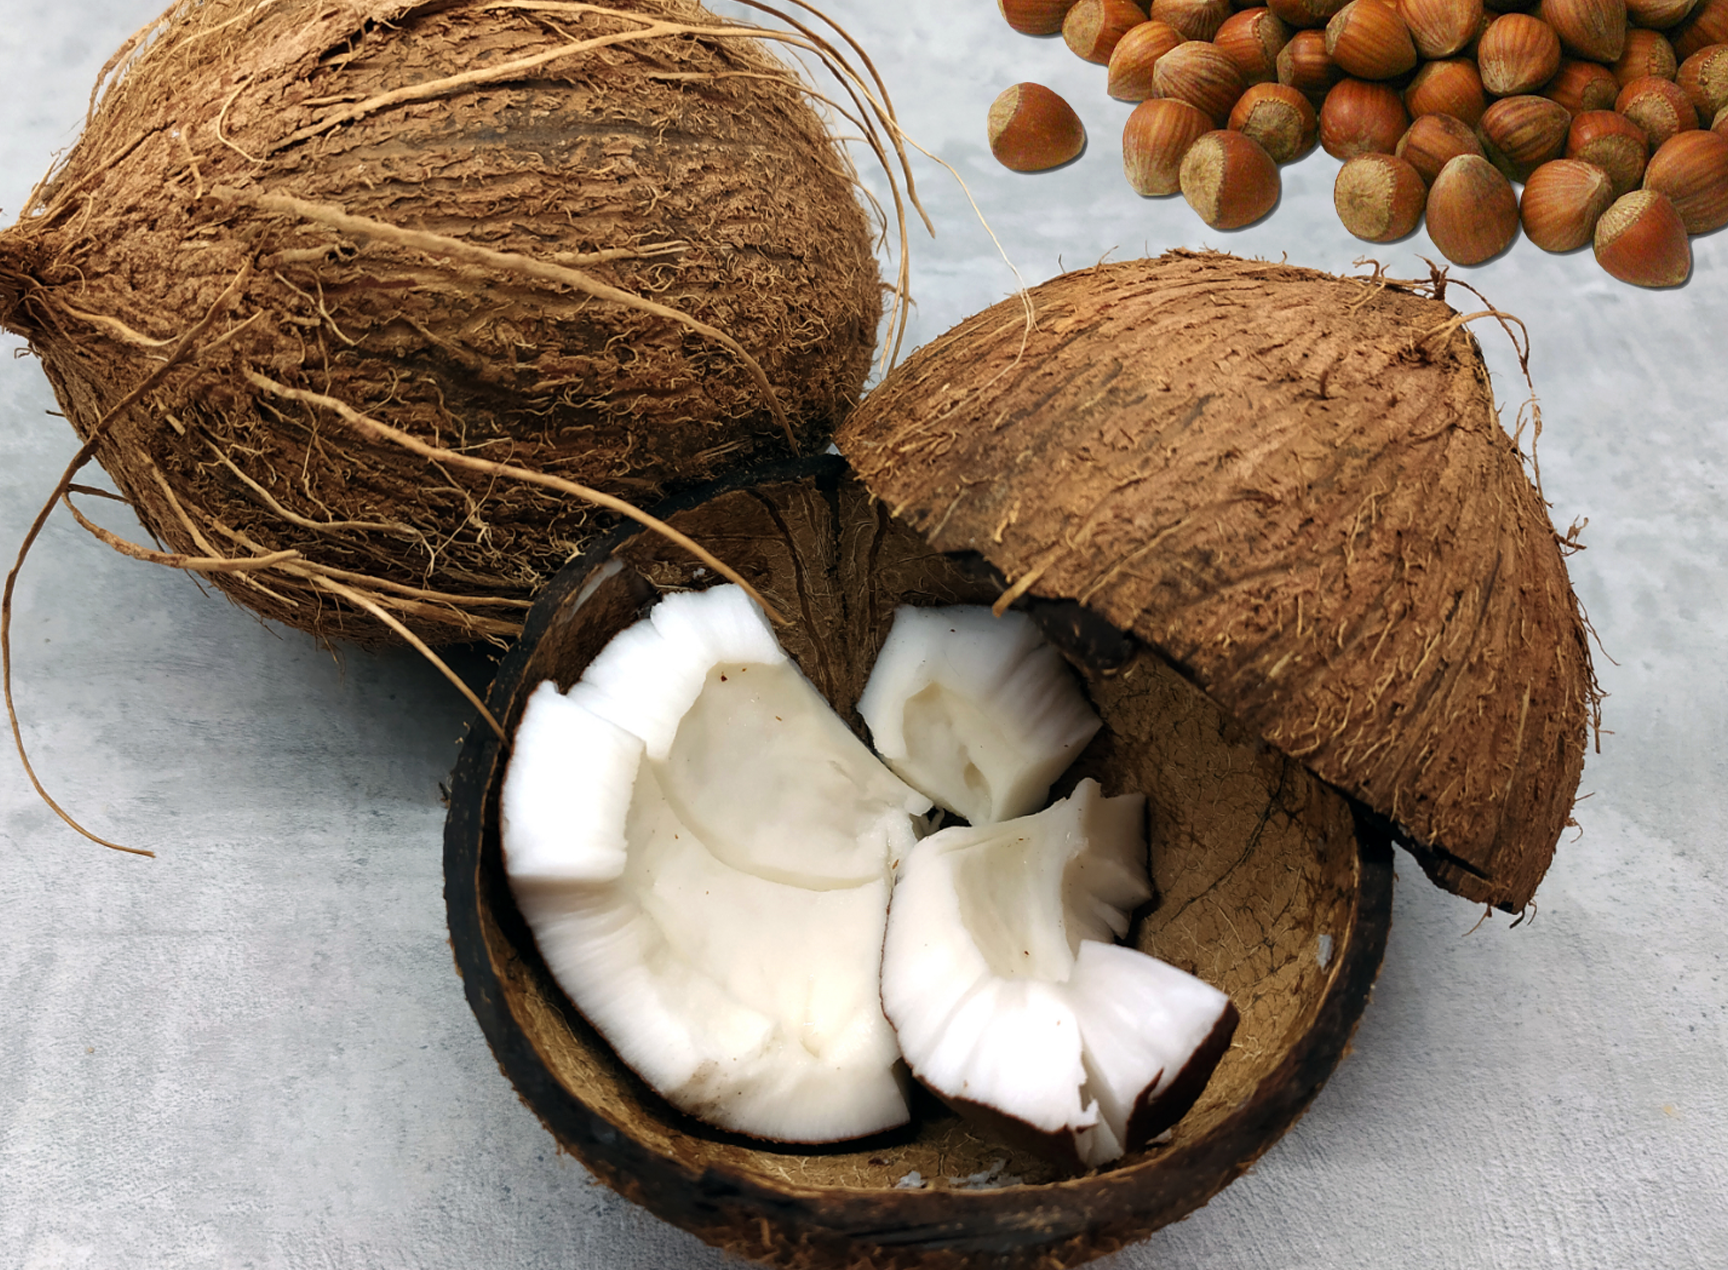 Hazelnuts and Coconuts: Two Powerhouse Nutrients for Hormonal Balance